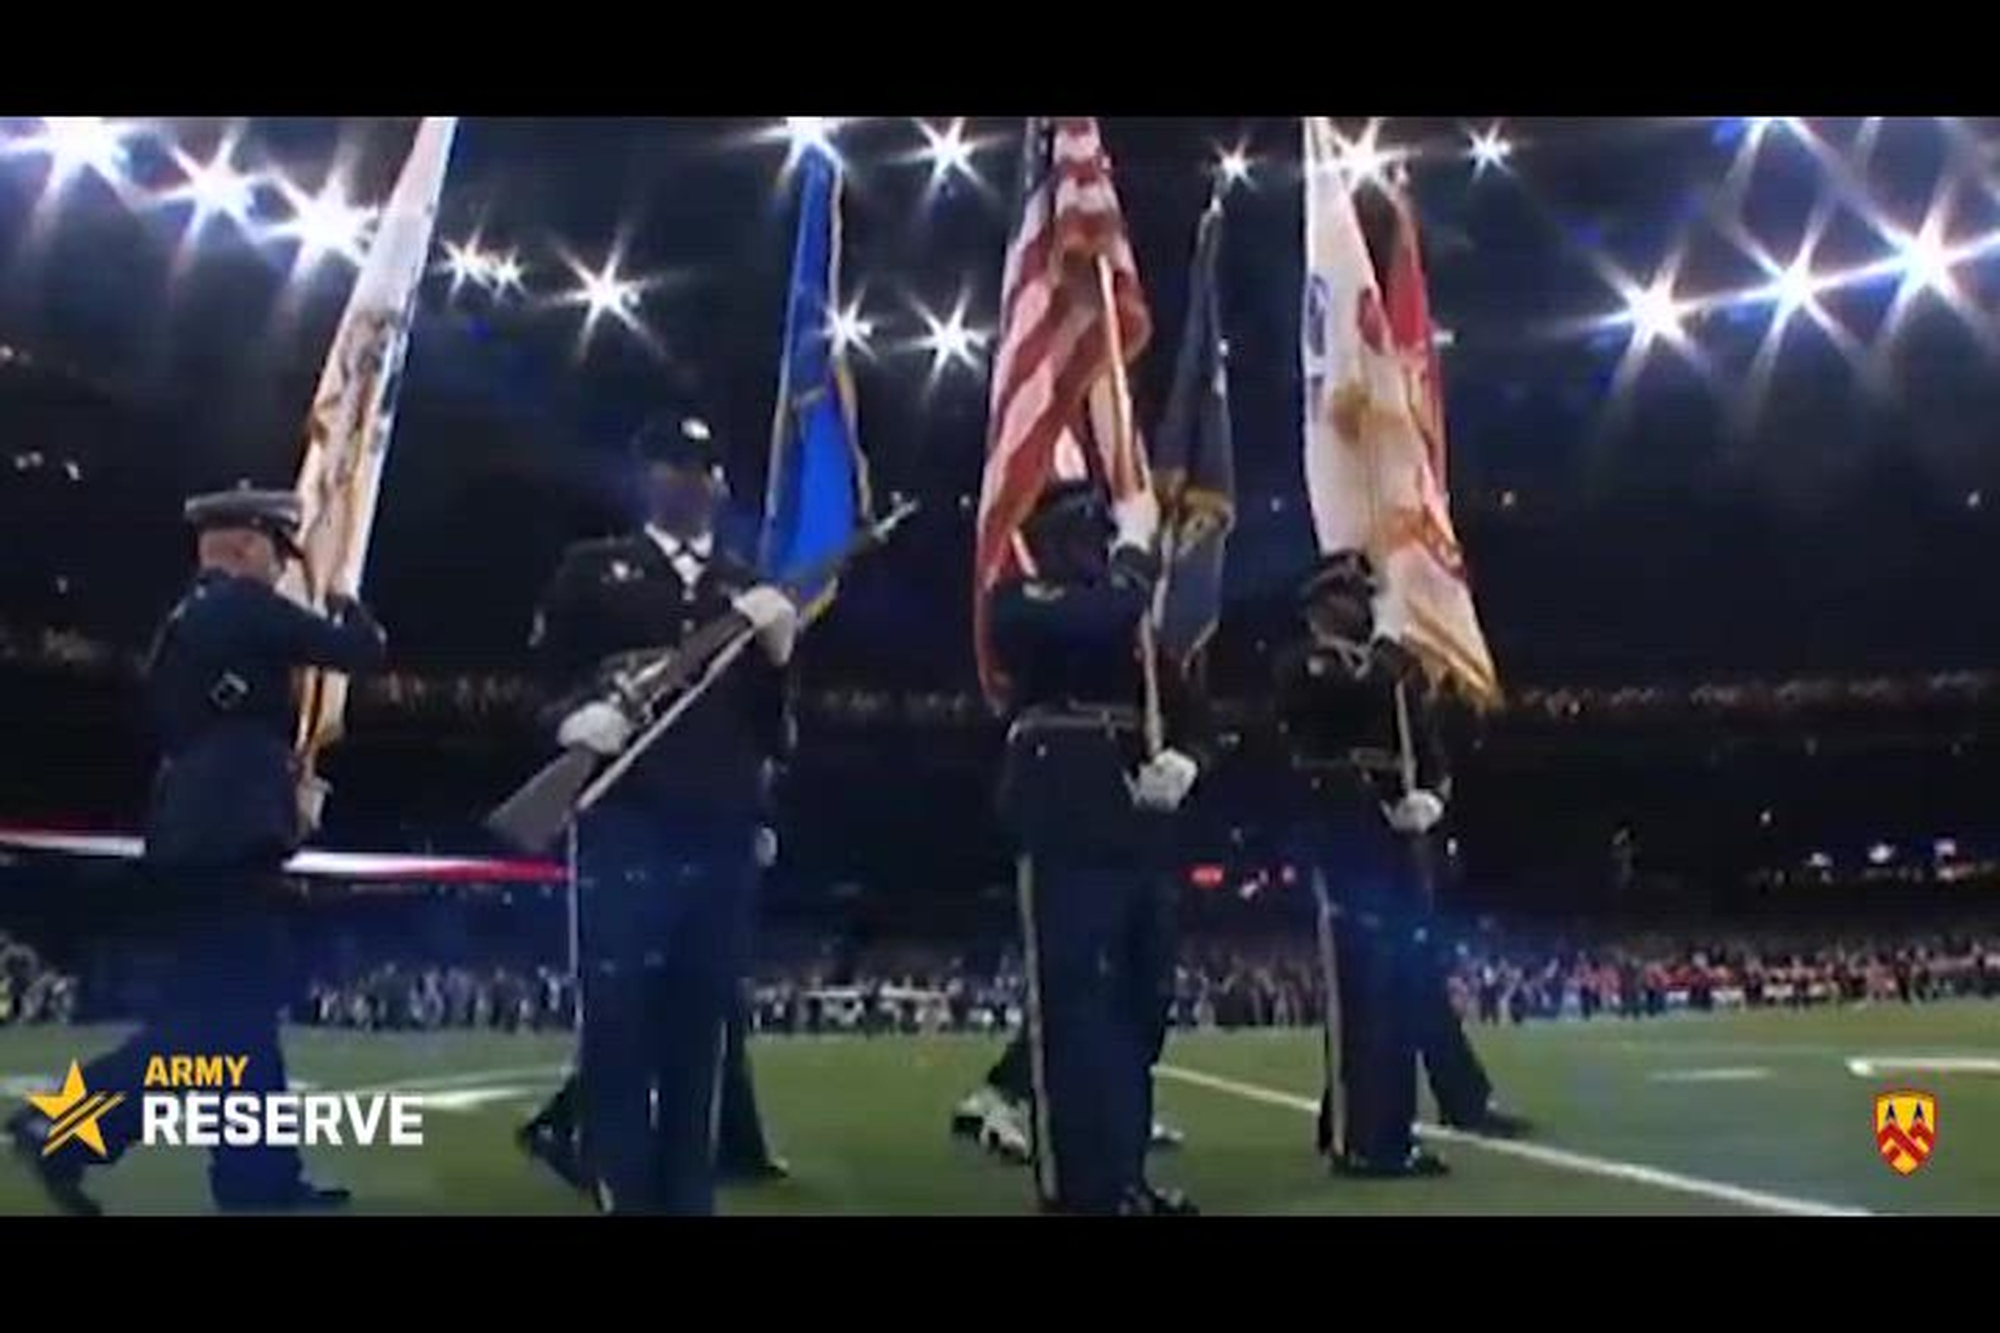 The 377th Theater Sustainment Command is the lead element in the coordination and execution of military joint color guards in the Greater New Orleans area. The video shows a few of the many events the 377 team and fellow service members have executed over the years.